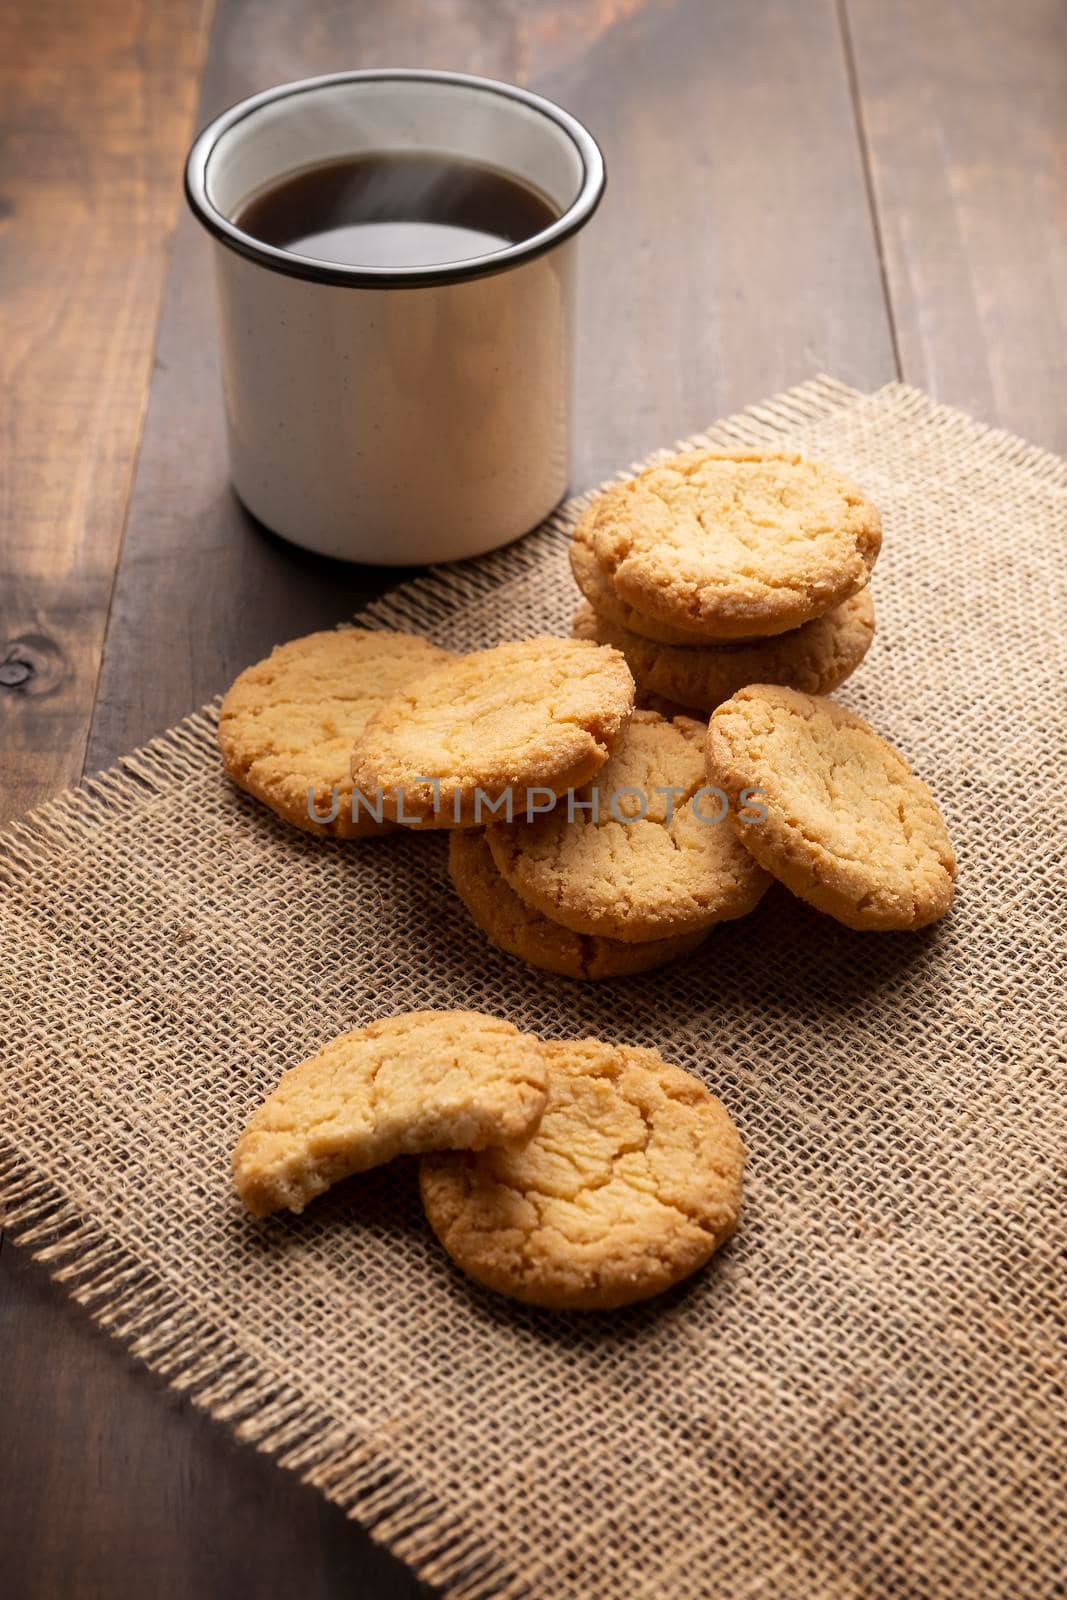 Homemade crunchy cookies and a black coffee cup on wooden rustic table